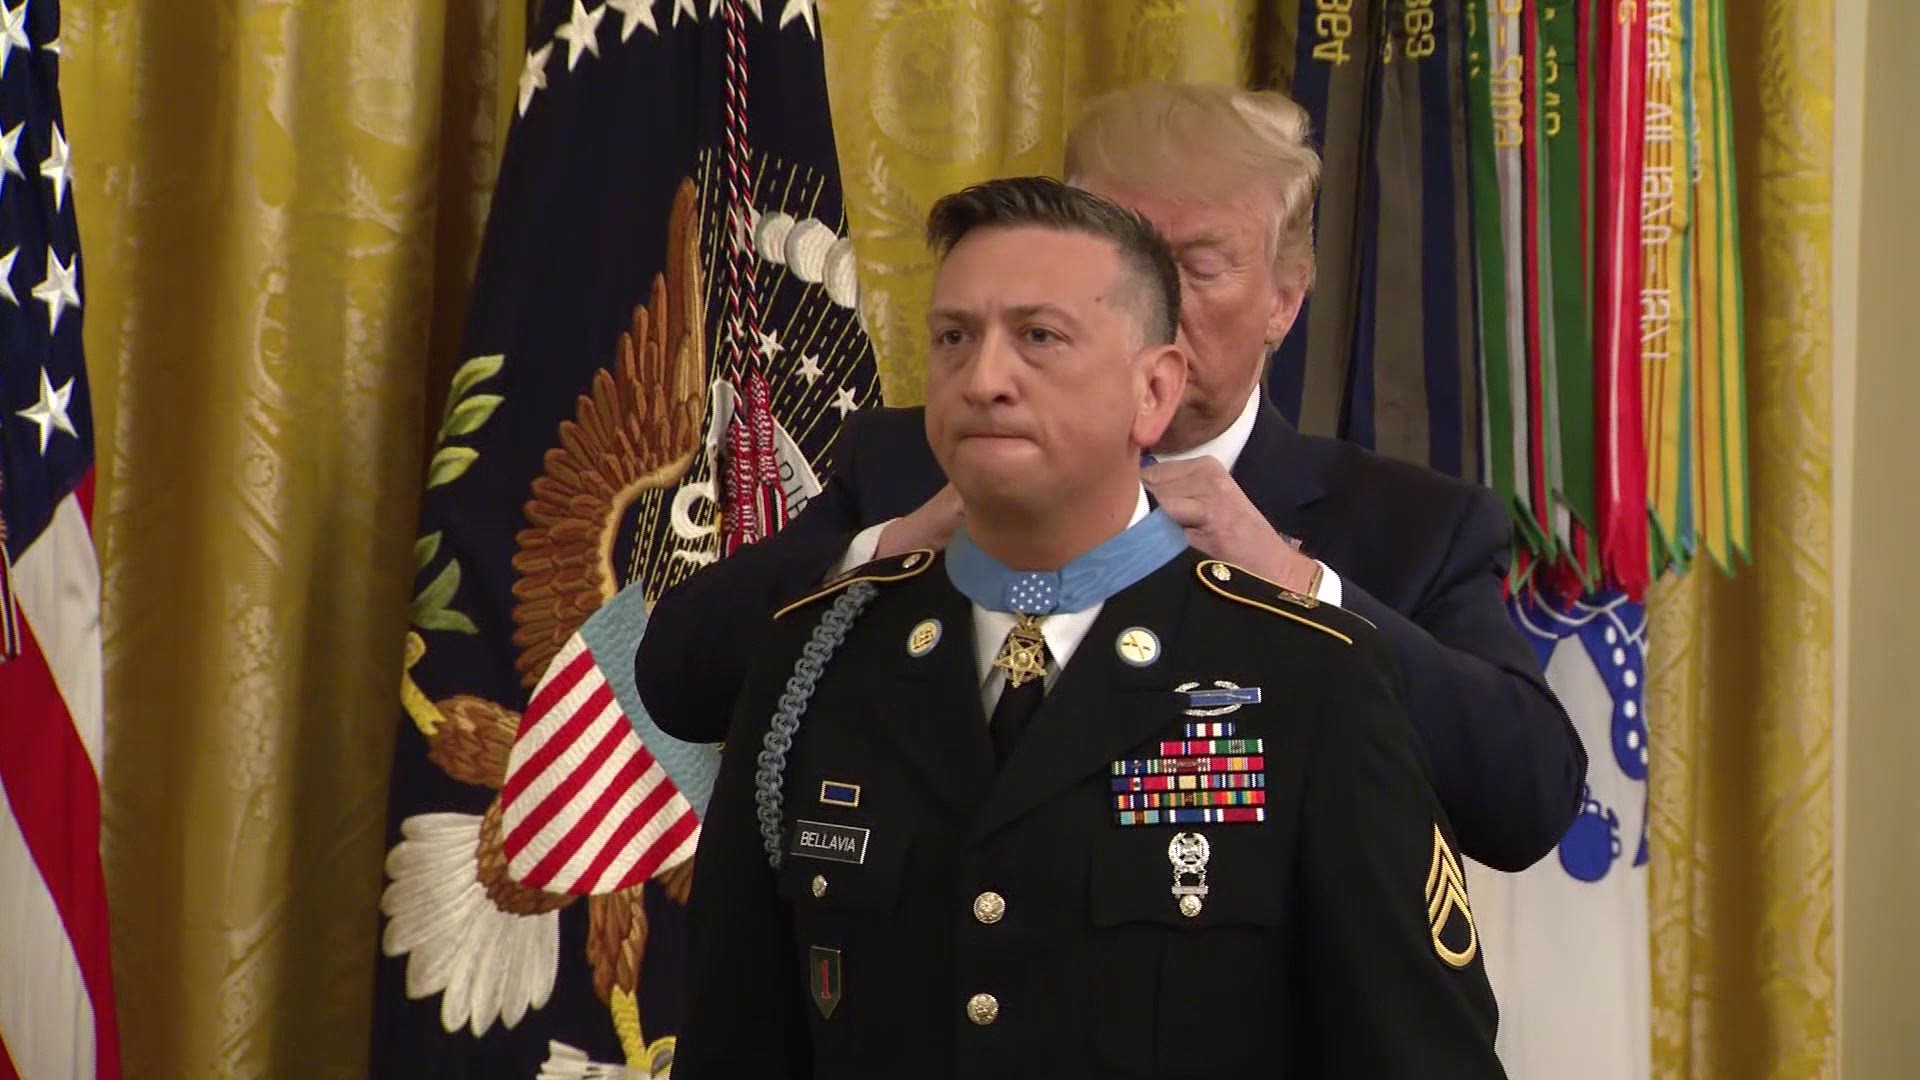 Former Army Staff Sgt. David Bellavia was honored with a Medal of Honor Monday, making him the first living Iraq War veteran to receive the nation’s highest military decoration.